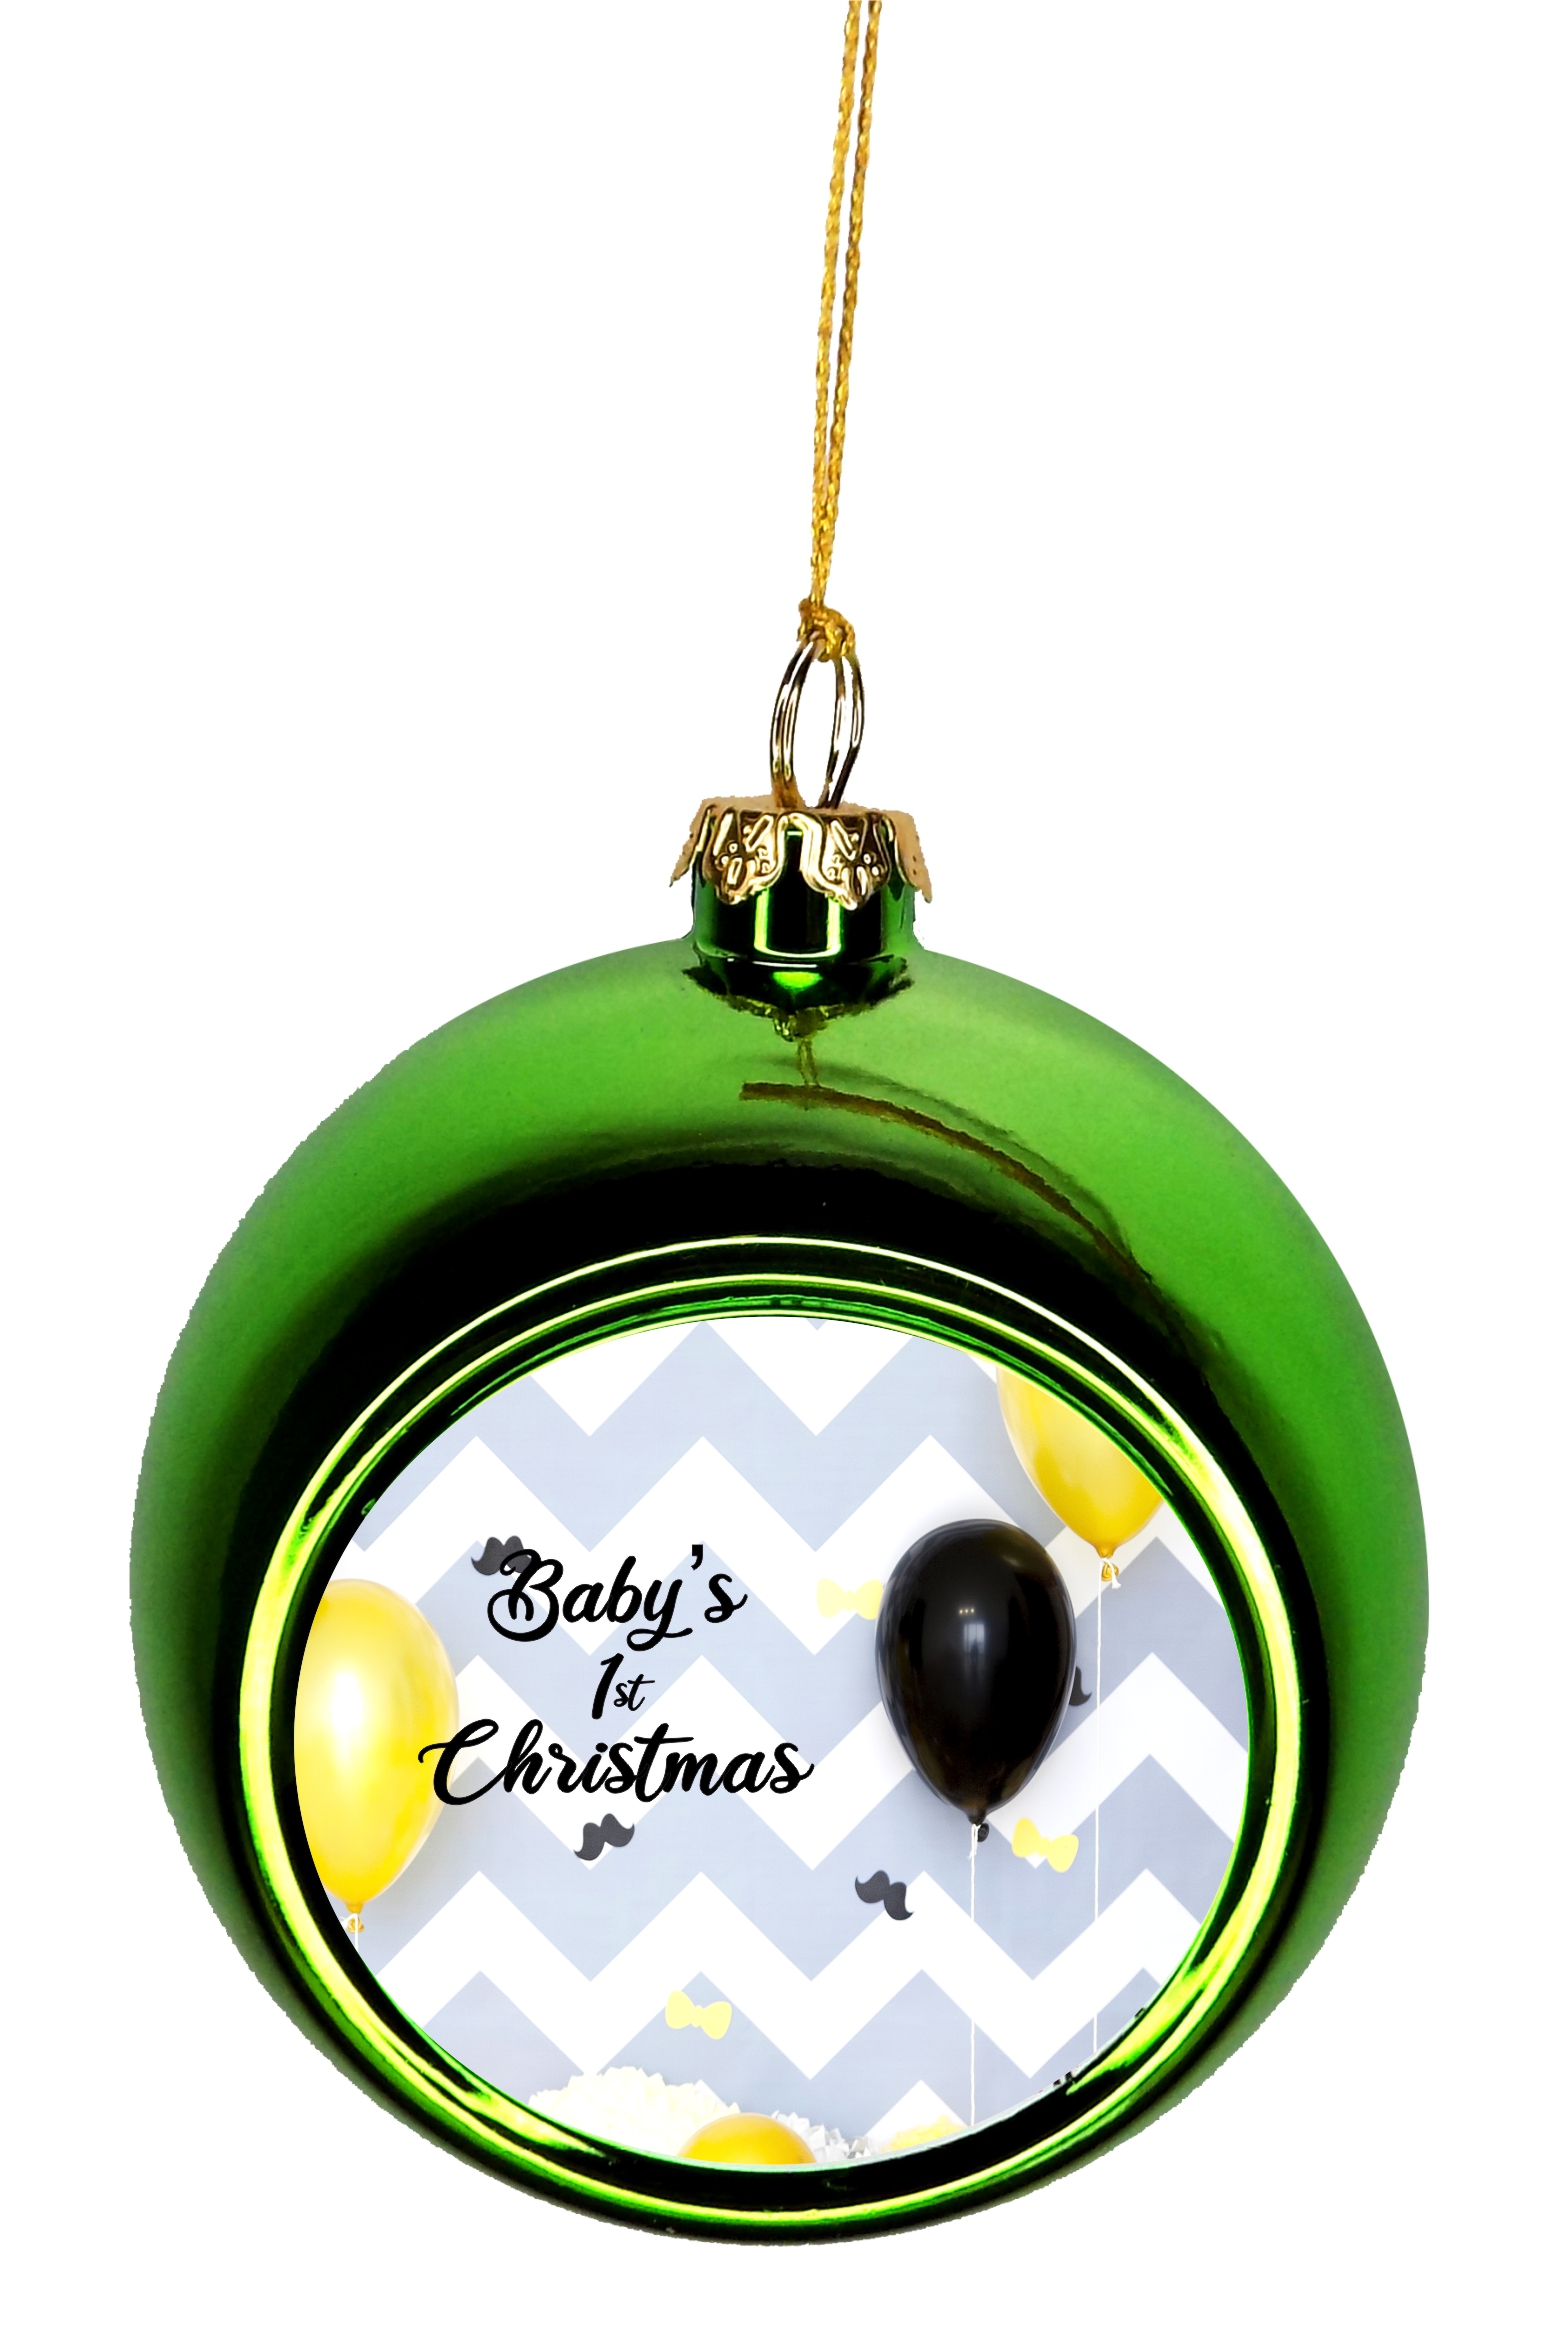 Baby 1st Christmas Ornament New Baby First Year Ornament Babys First Christmas Xmas Ornament - Baby 1st Xmas Ornament Christmas DÃ©cor Green Ball Ornaments - image 1 of 1